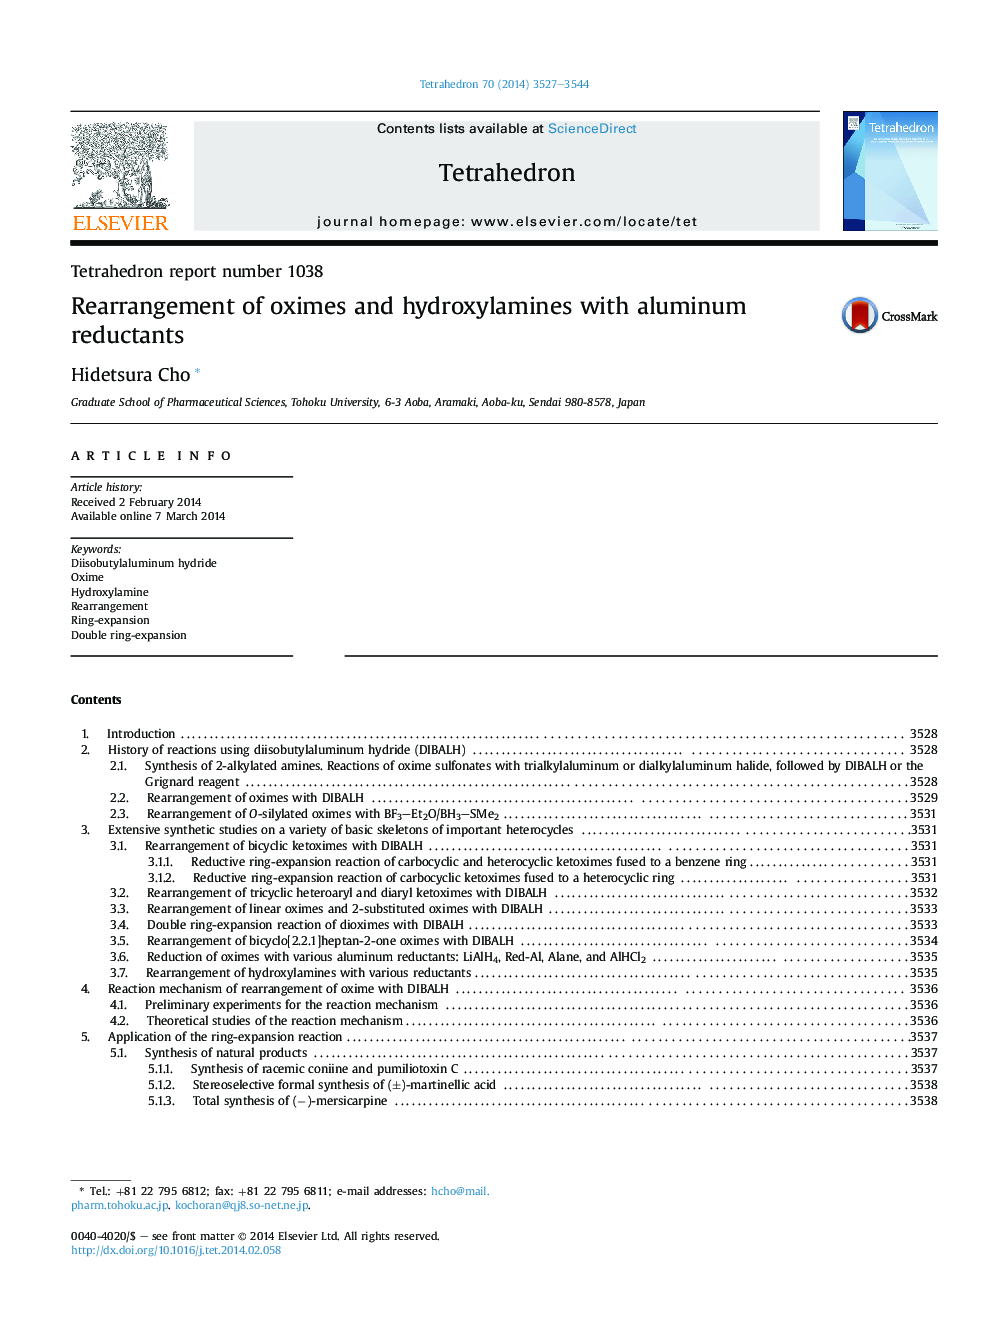 Tetrahedron report number 1038Rearrangement of oximes and hydroxylamines with aluminum reductants